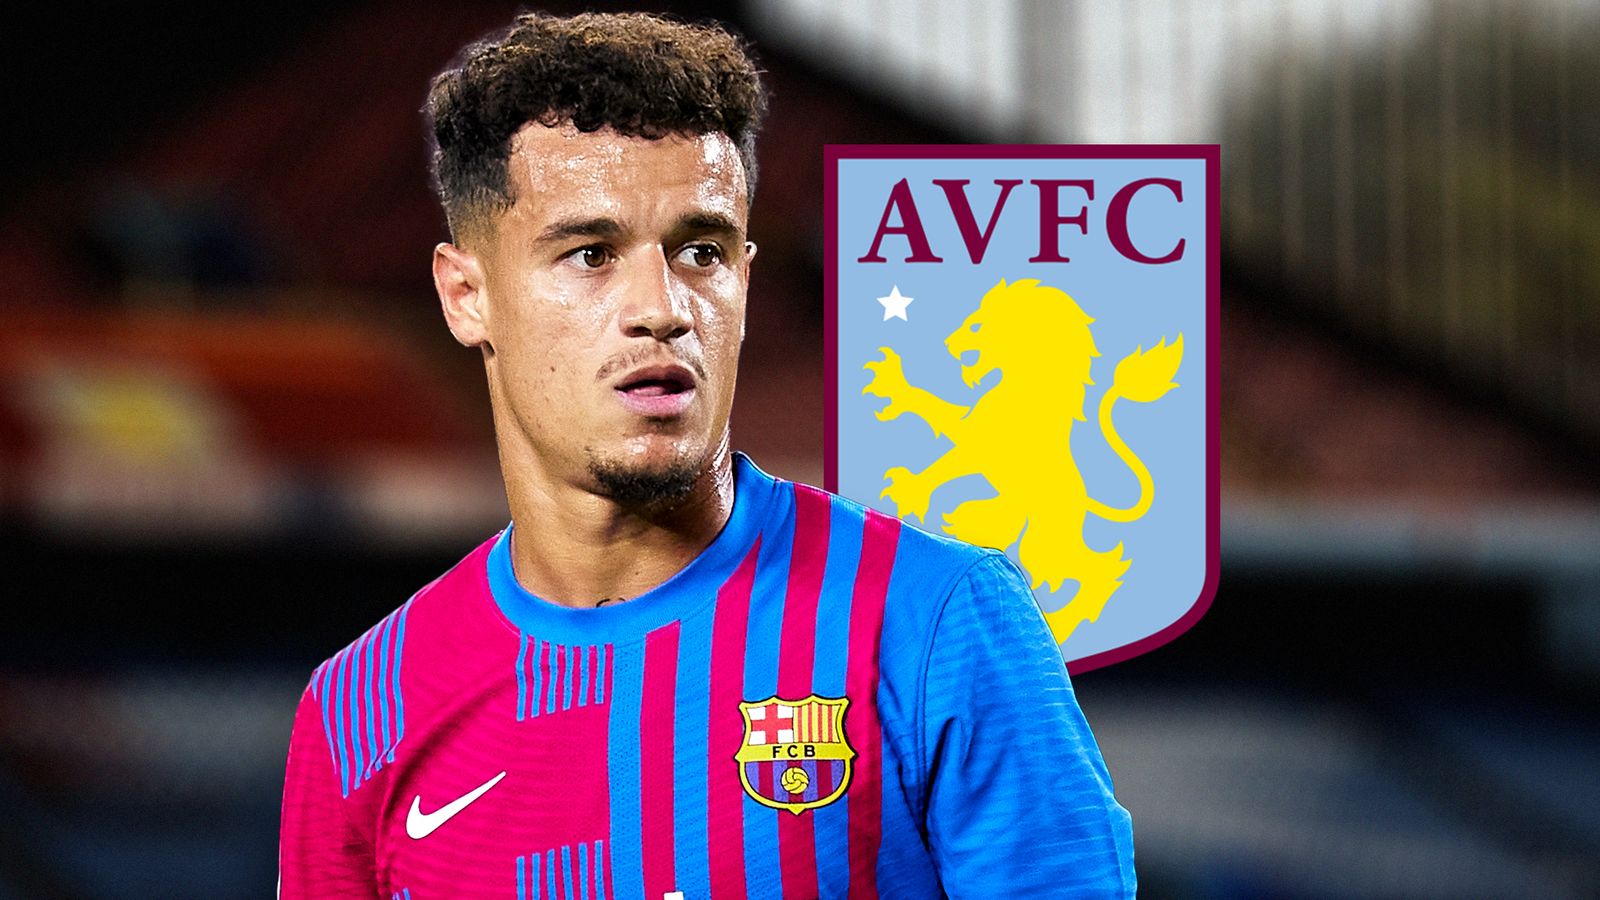 Aston Villa transfer news: Philippe Coutinho joins on loan from Barcelona until the end of the season